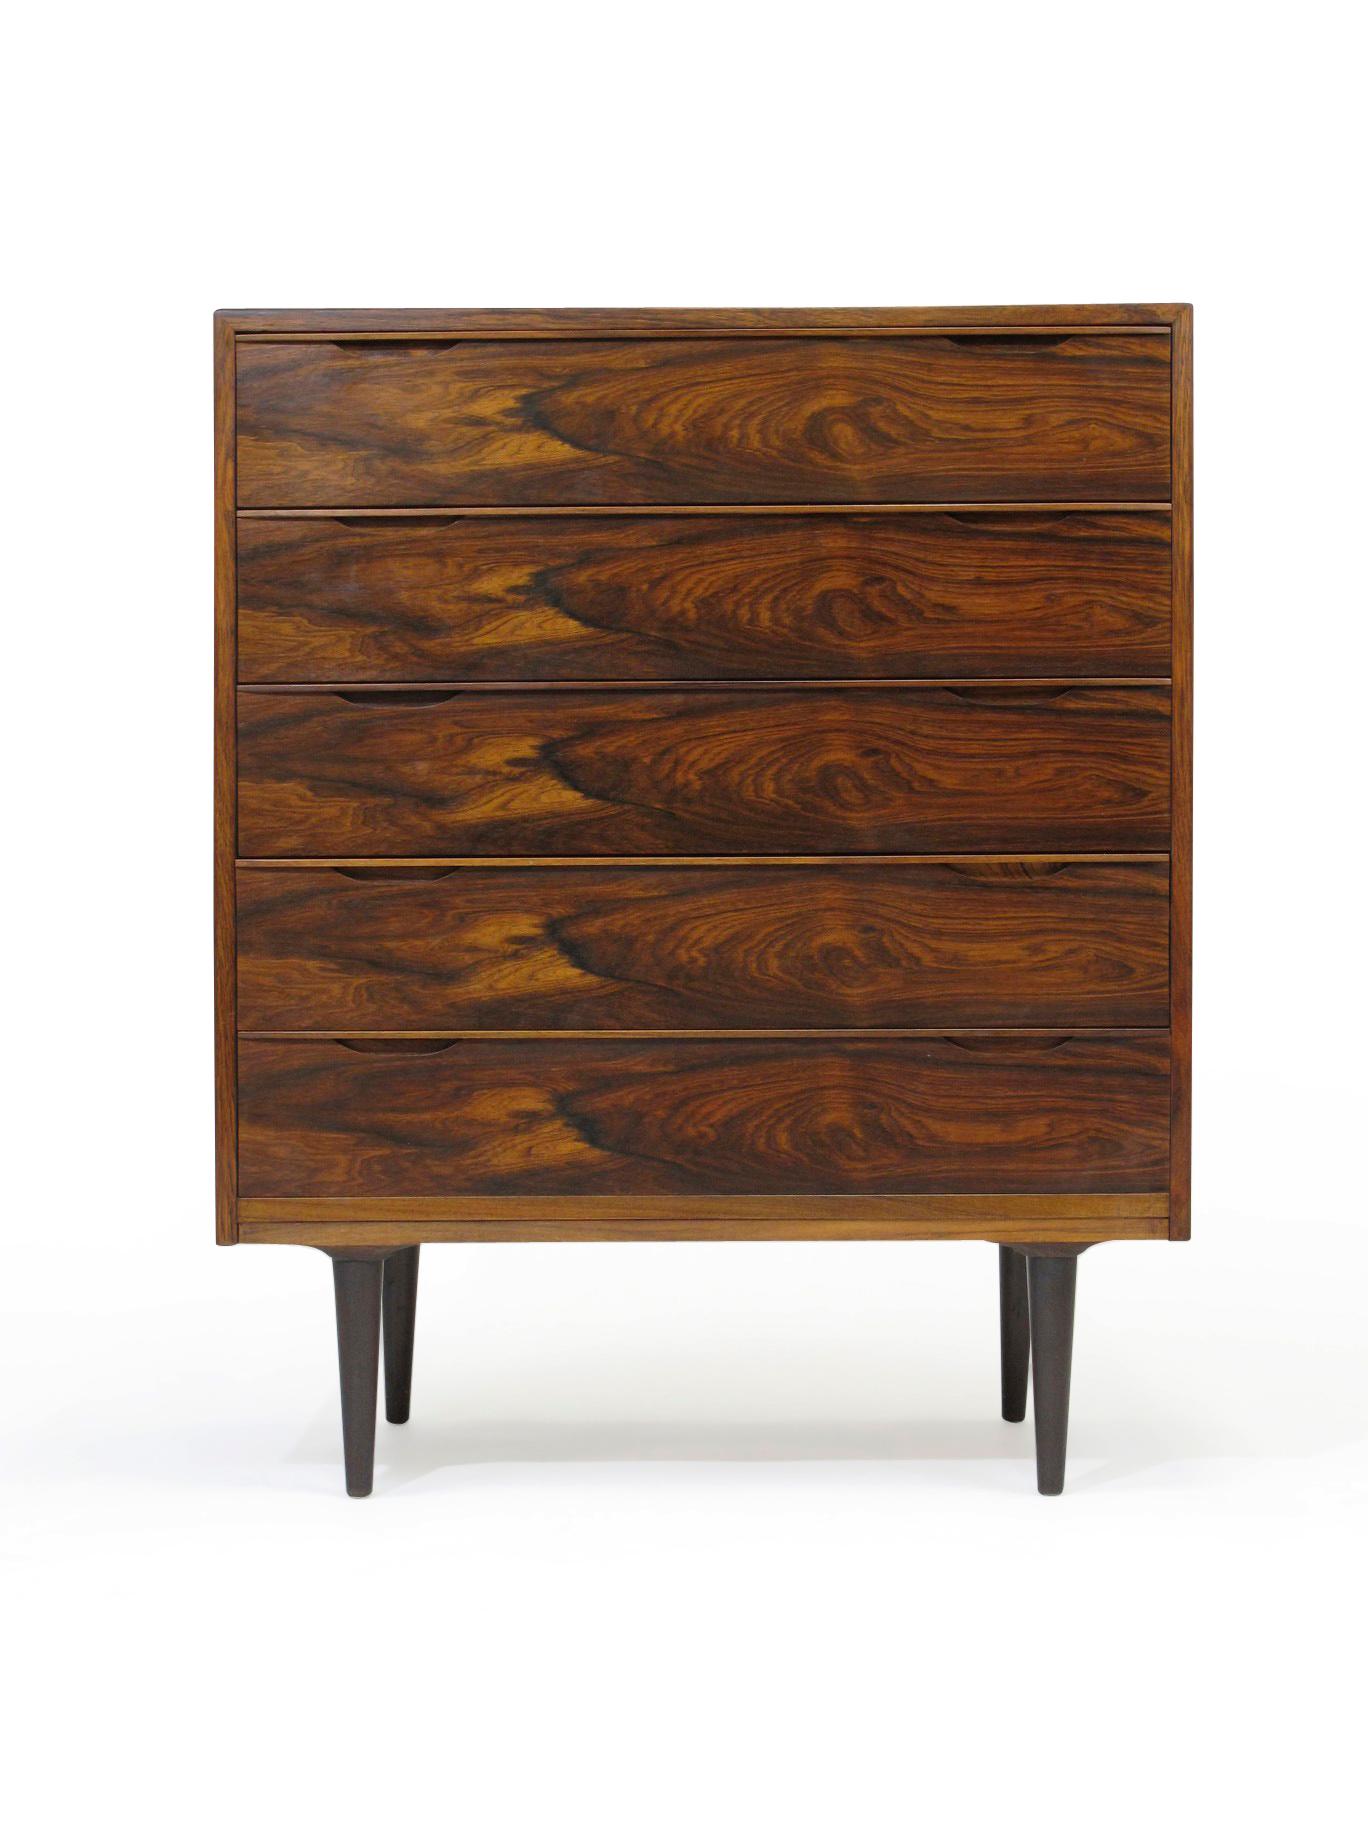 20th Century Vintage Danish Brazilian Rosewood Chest of Drawers